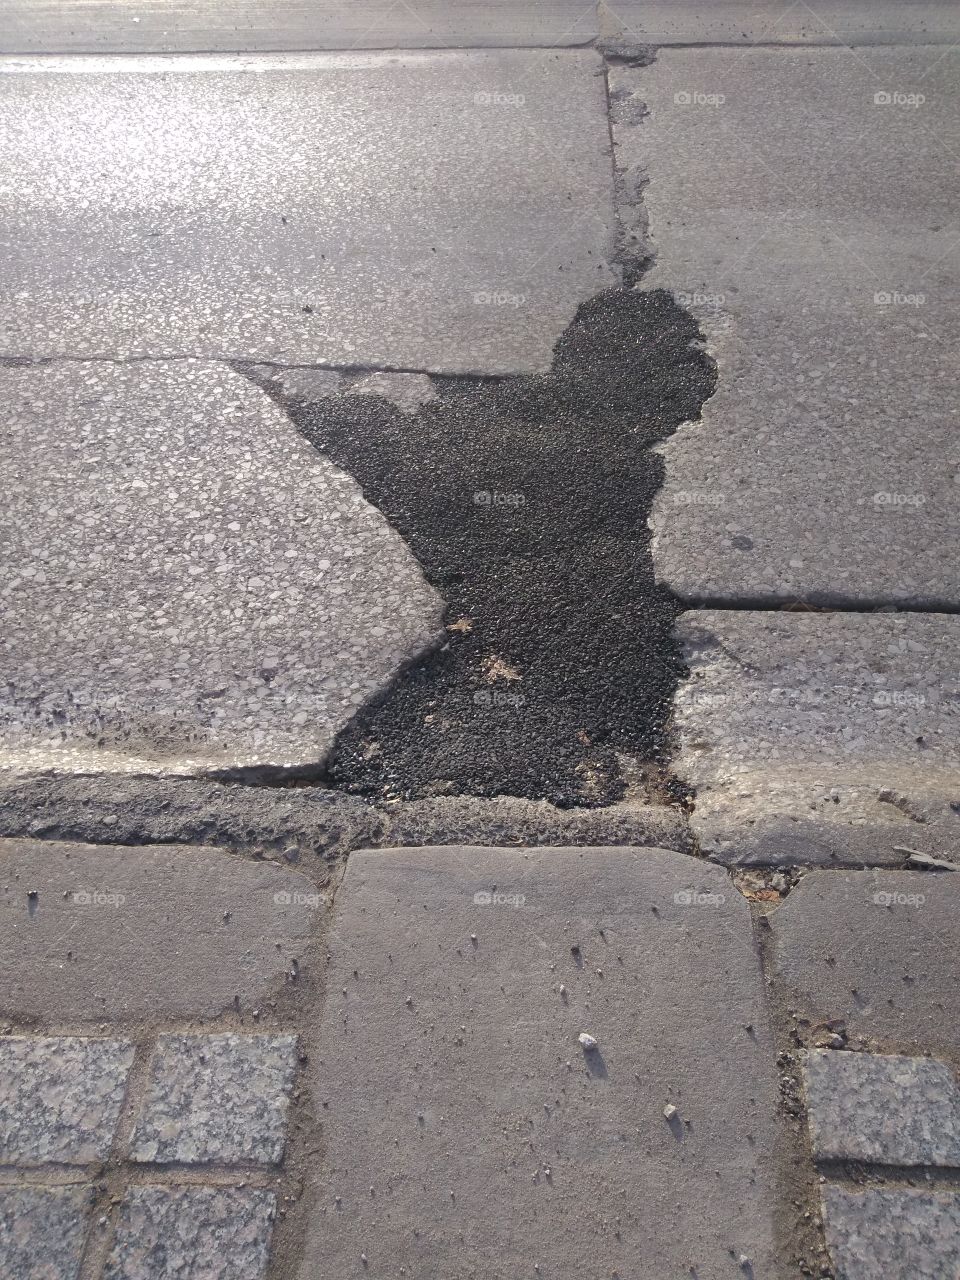 pot hole in street that has been patched/filled in.